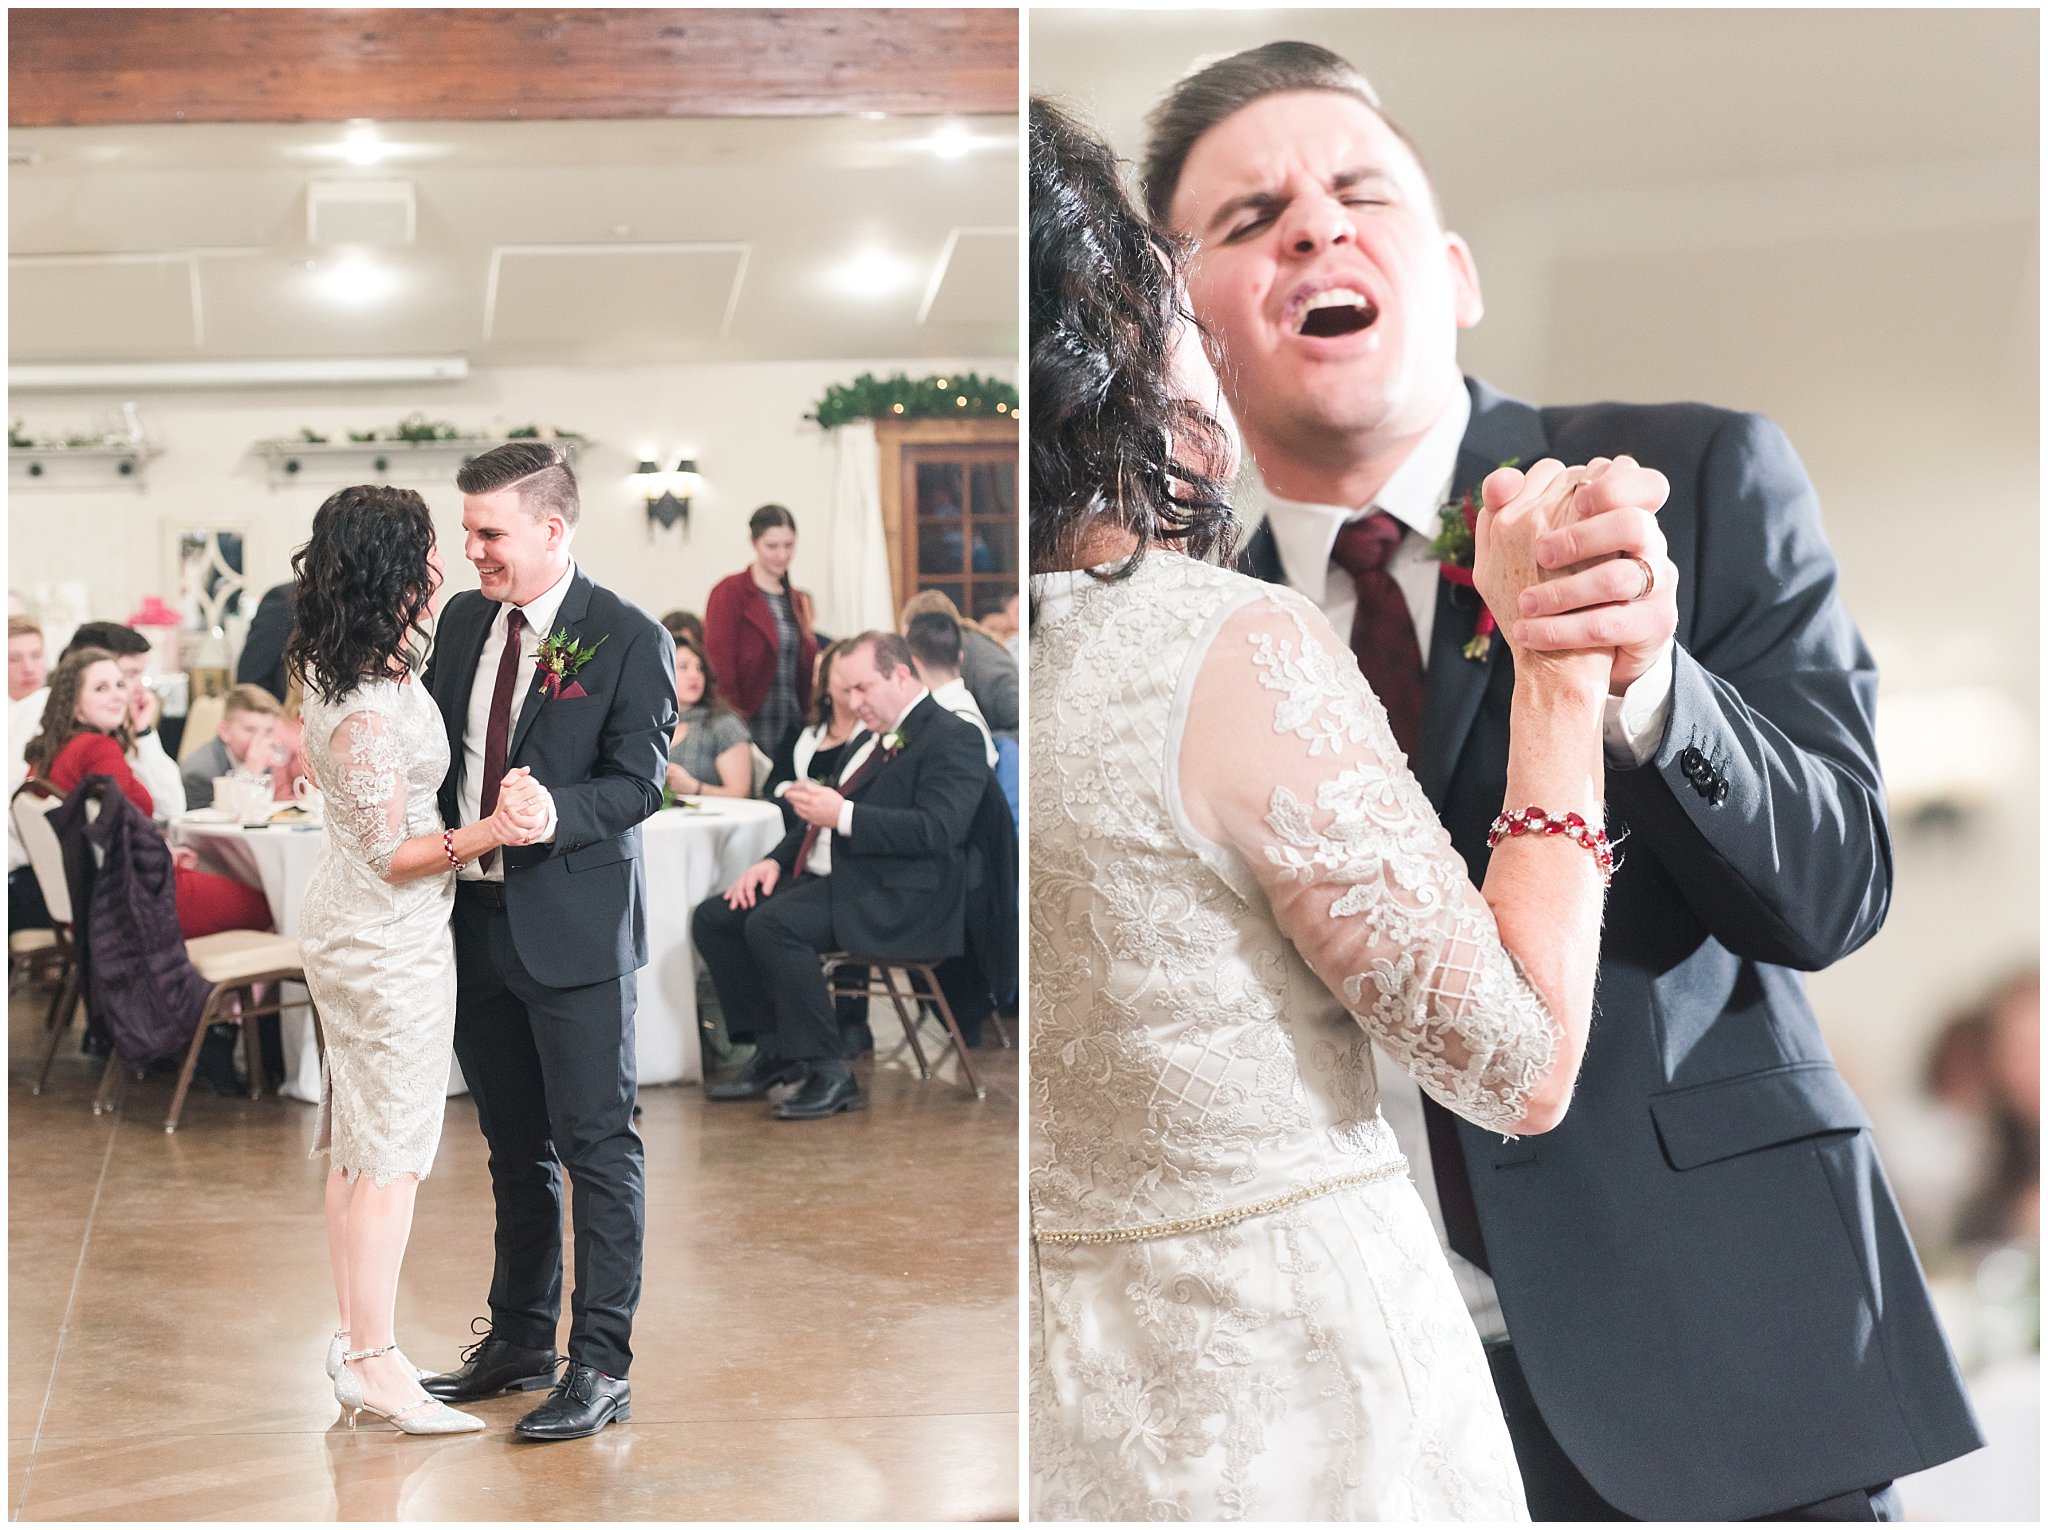 Mother son dance at the Gathering Place at Gardner Village | Gardner Village Wedding | The Gathering Place | Jessie and Dallin Photography